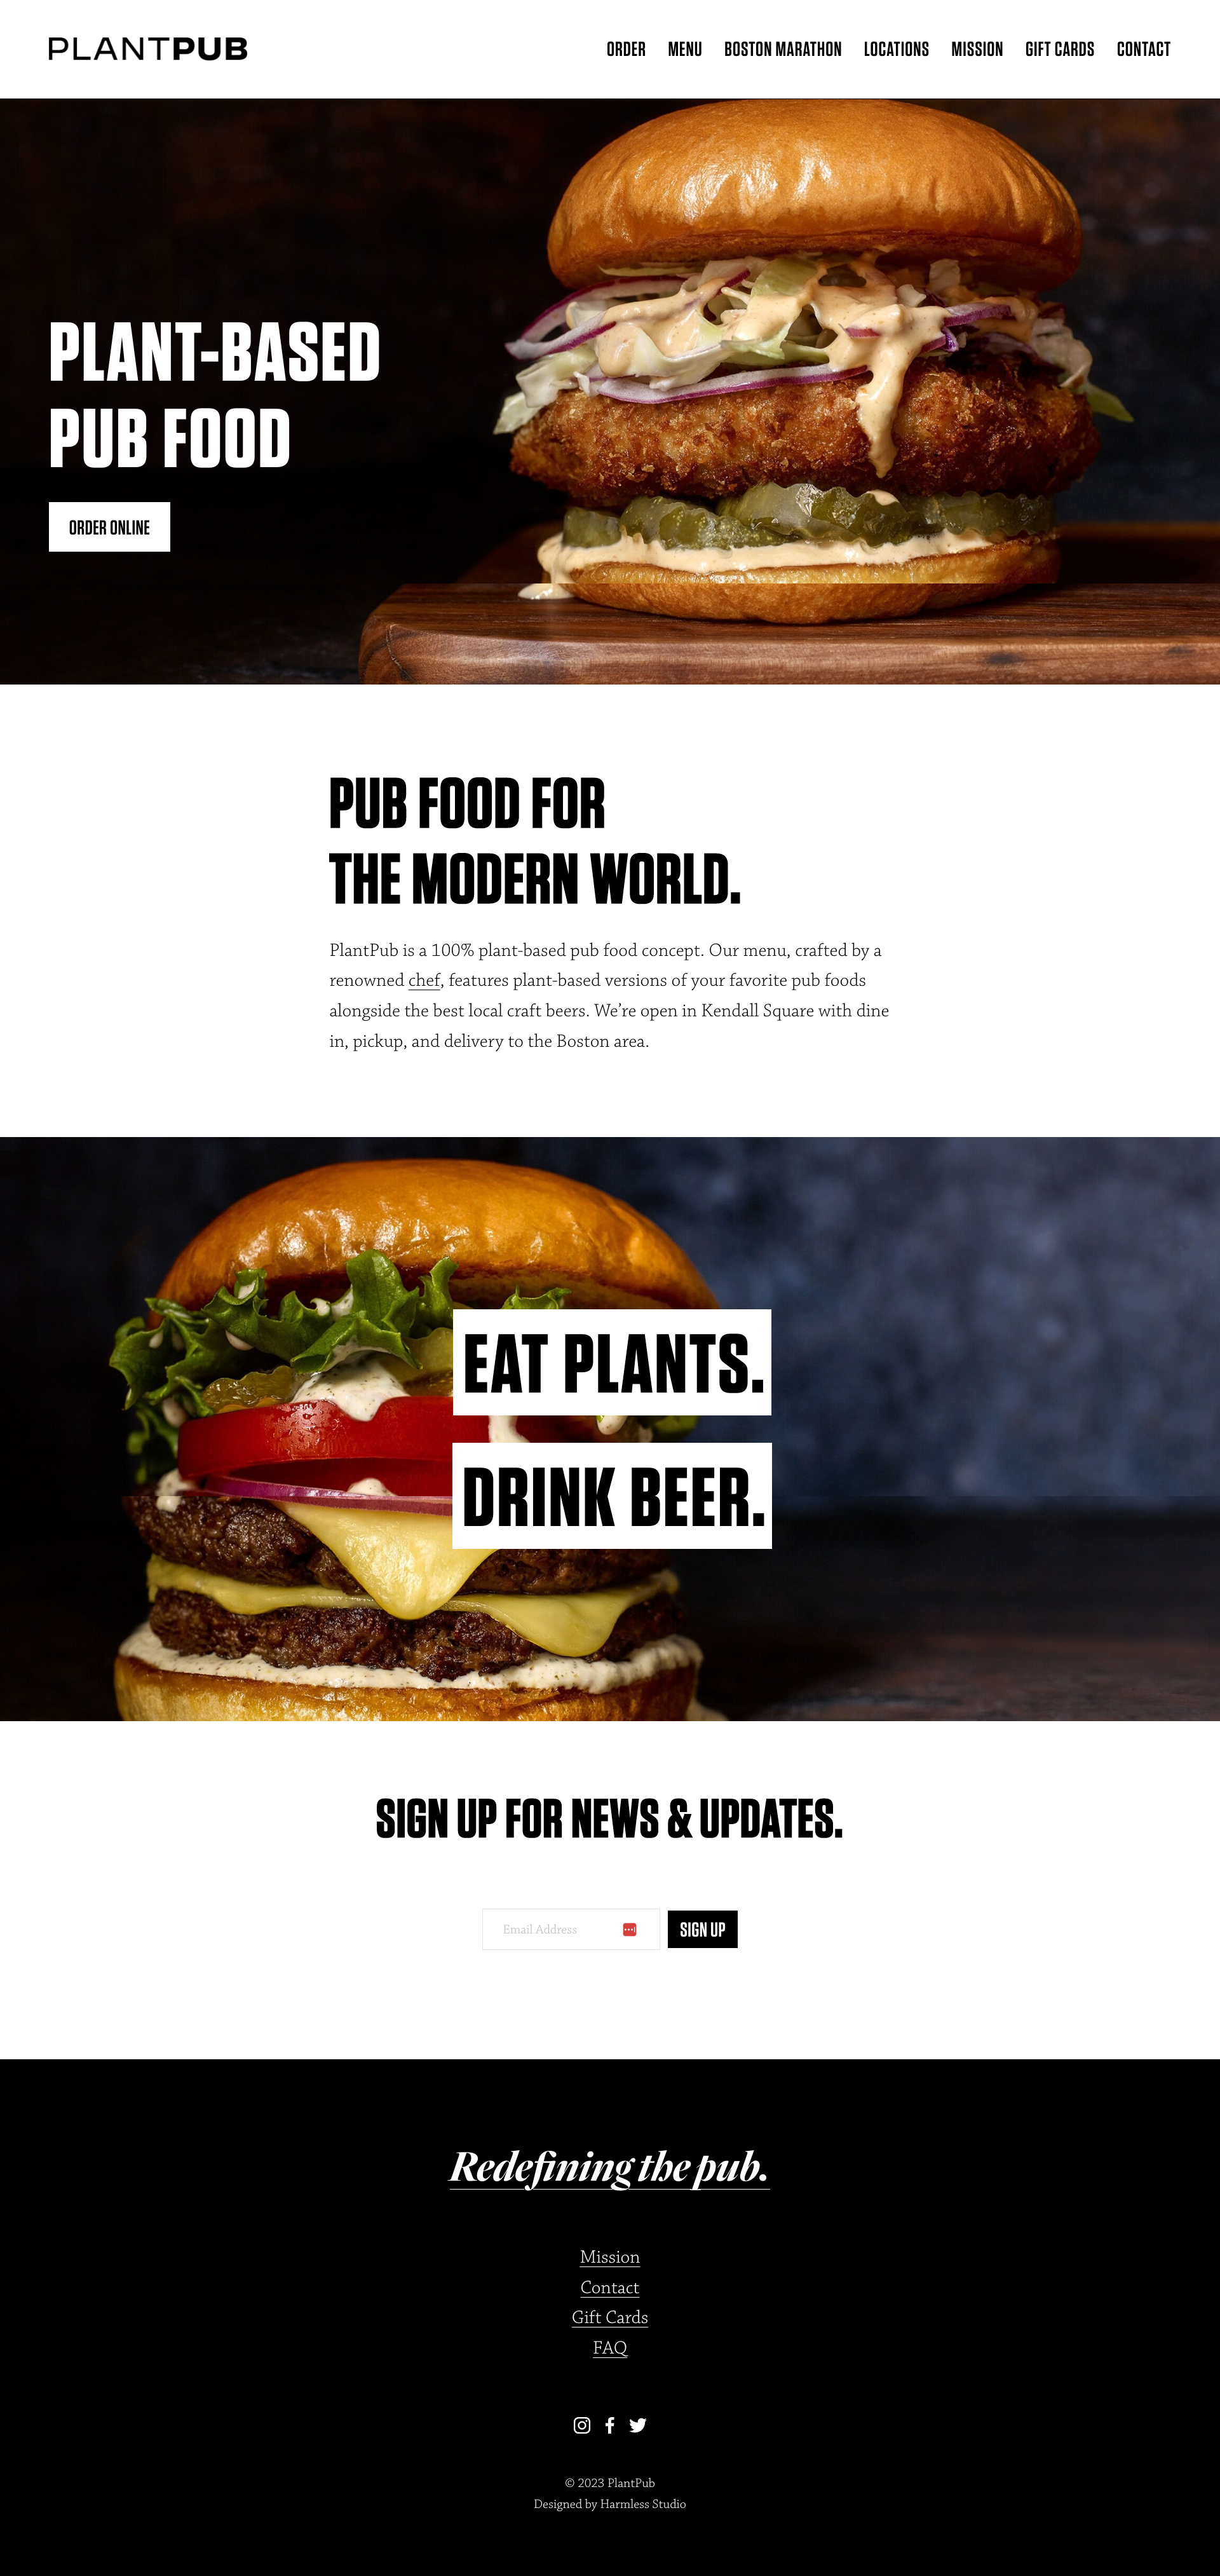 A full-page screenshot of the PlantPub website